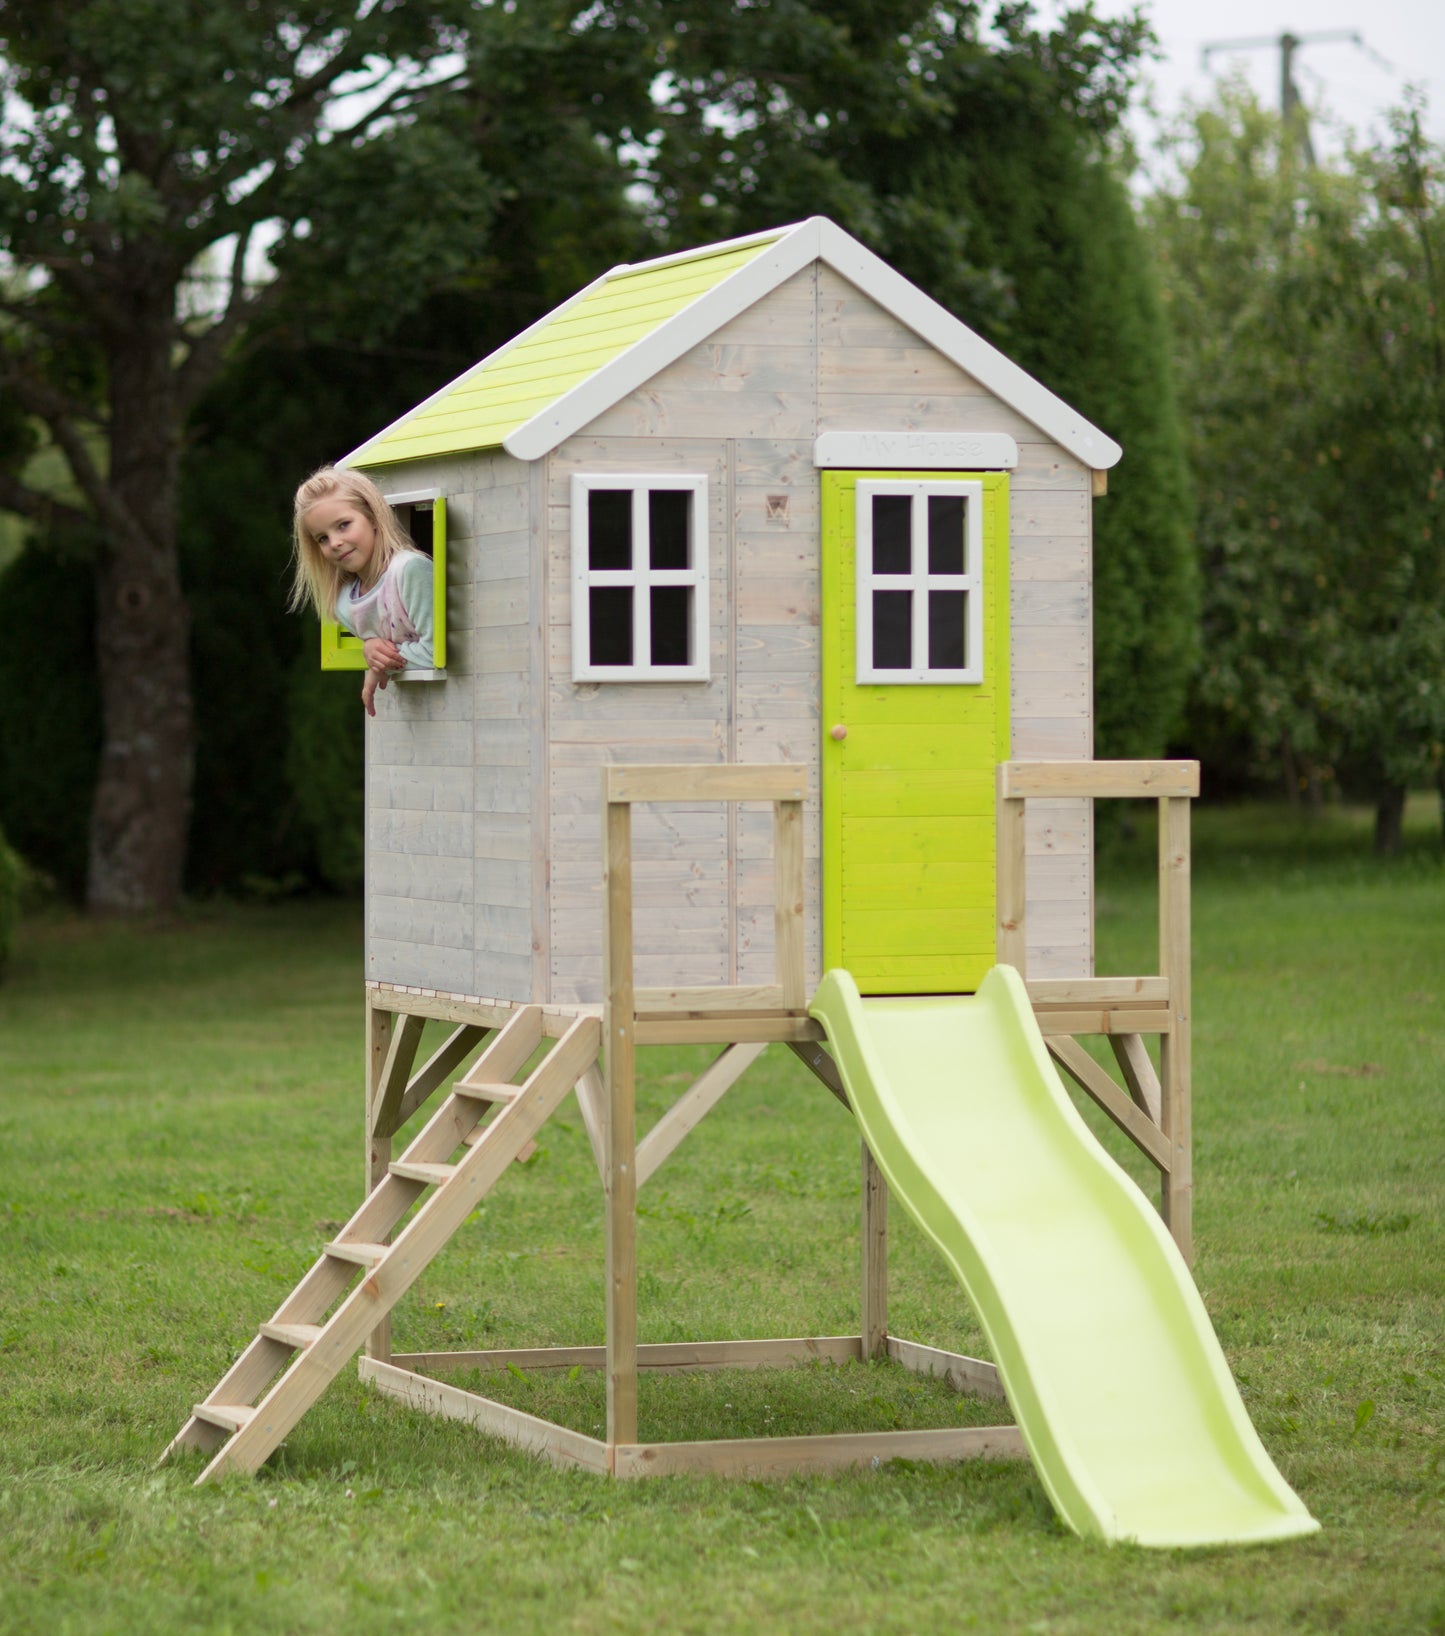 M22L Garden playhouse with slide "My Lodge"